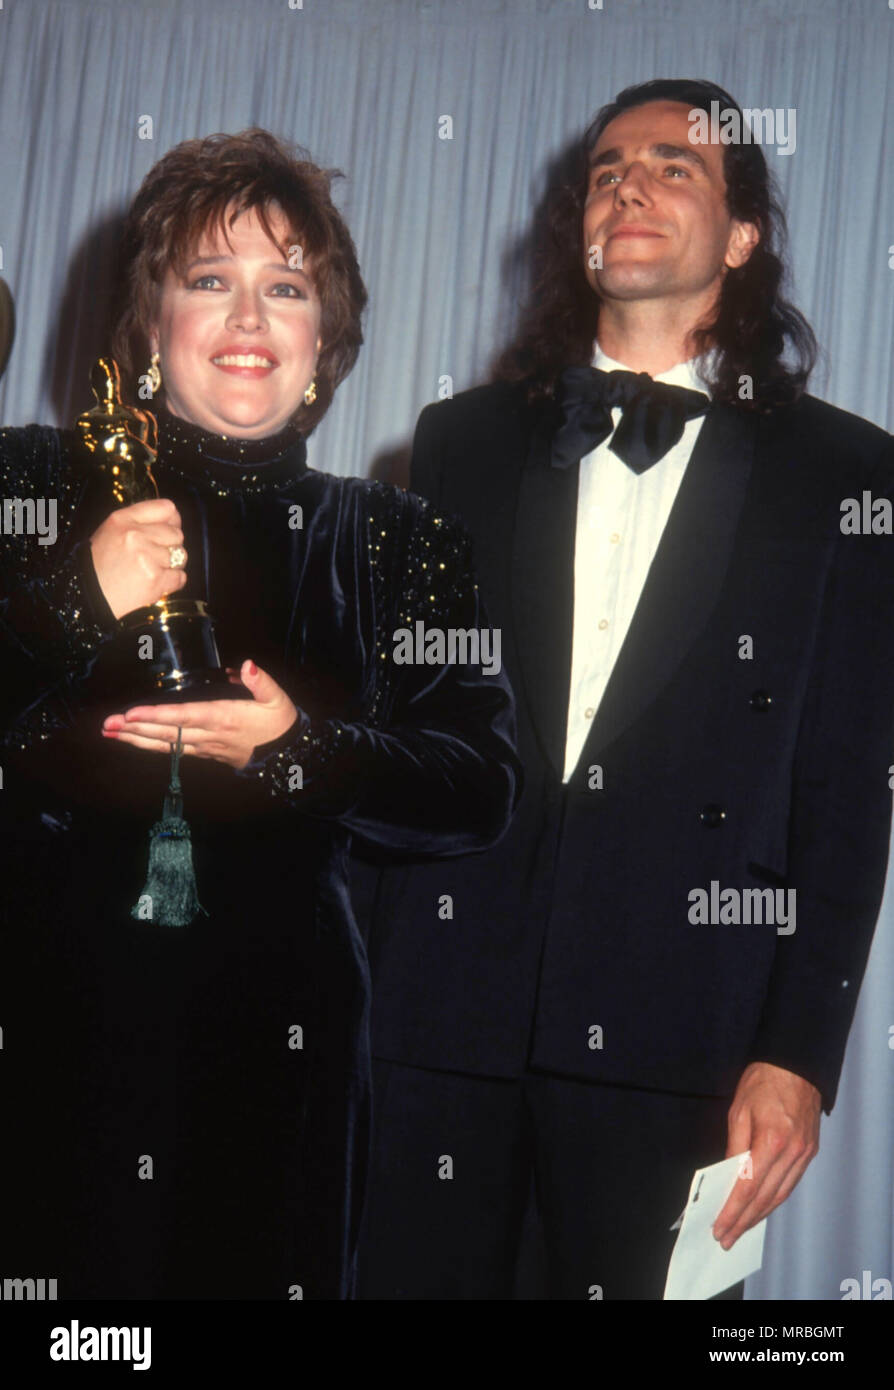 LOS ANGELES, CA - MARCH 25: (L-R) Actress Kathy Bates and actor Daniel Day  Lewis attend the 63rd Annual Academy Awards on March 25, 1991 at Shrine  Auditorium in Los Angeles, California.